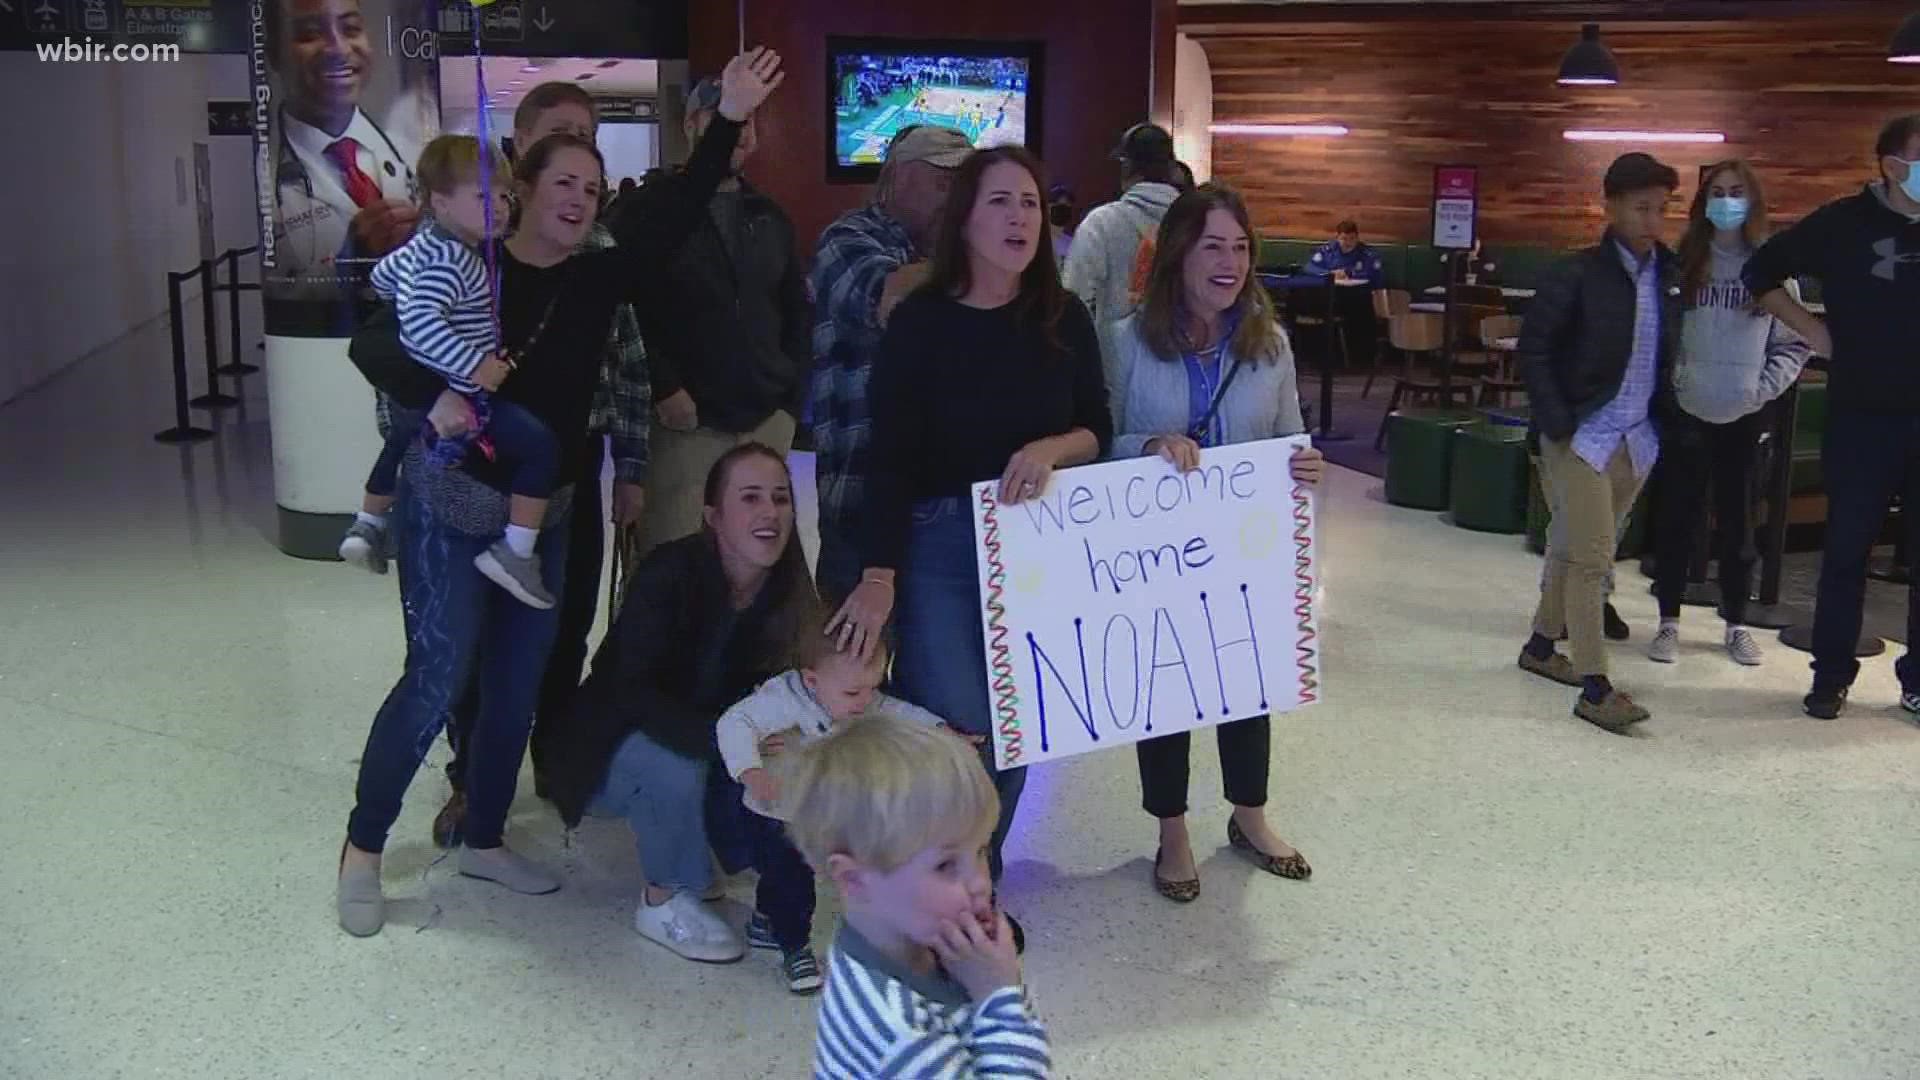 3-year-old Noah Clare is back home in Gallatin. The past couple of weeks have been full of heartbreak, frustration and tears for Noah’s family.